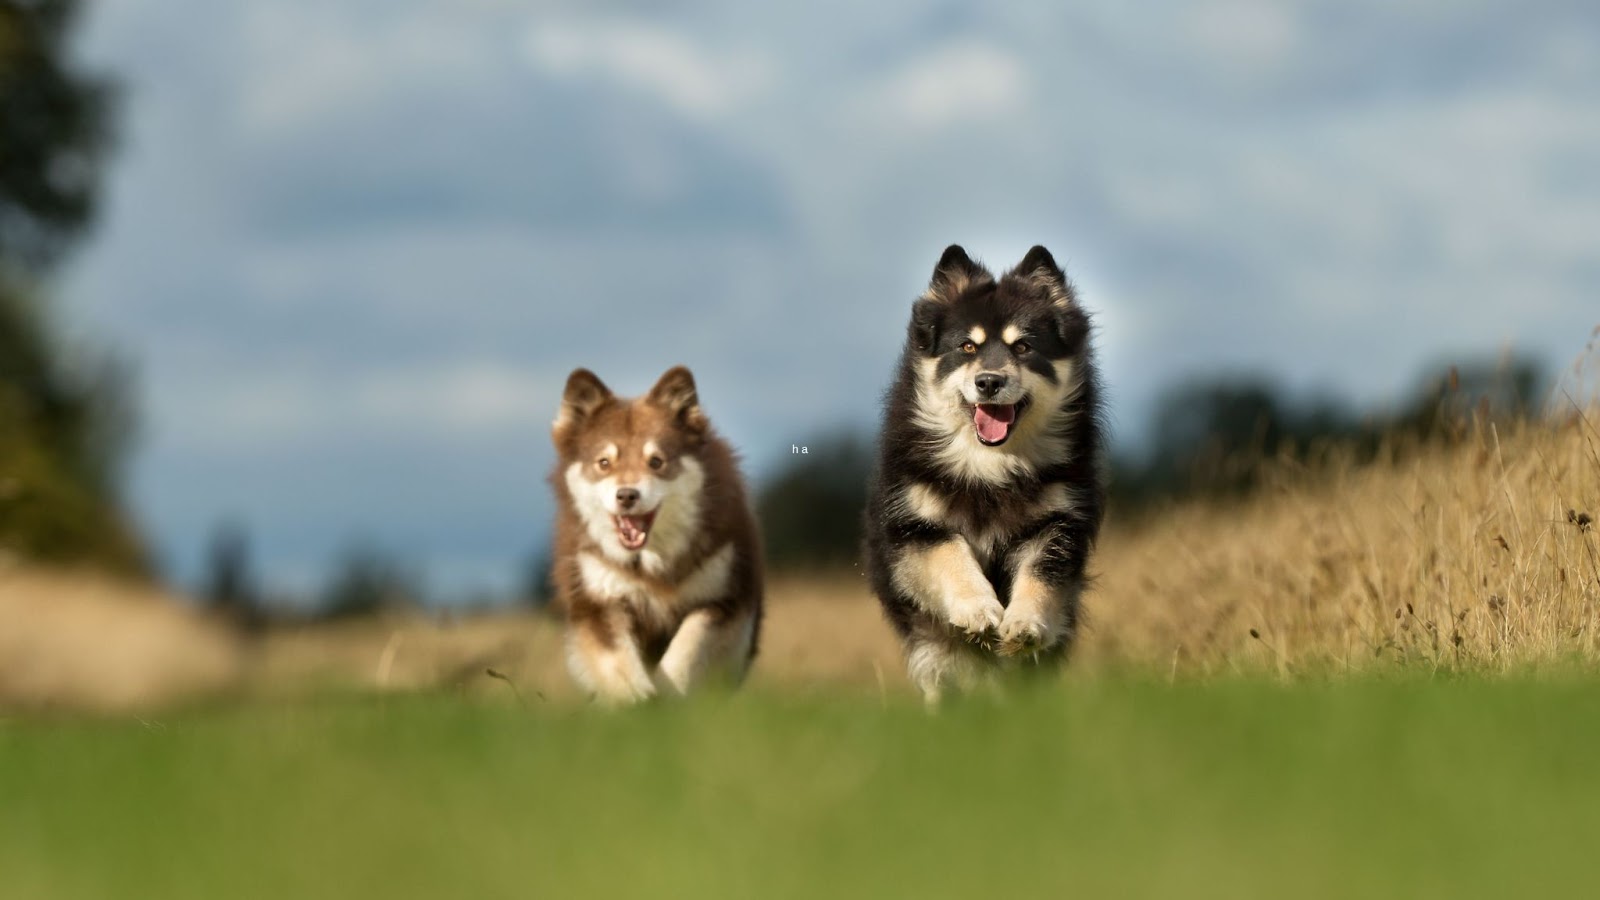 two Finnish Lapphund dogs running on grass